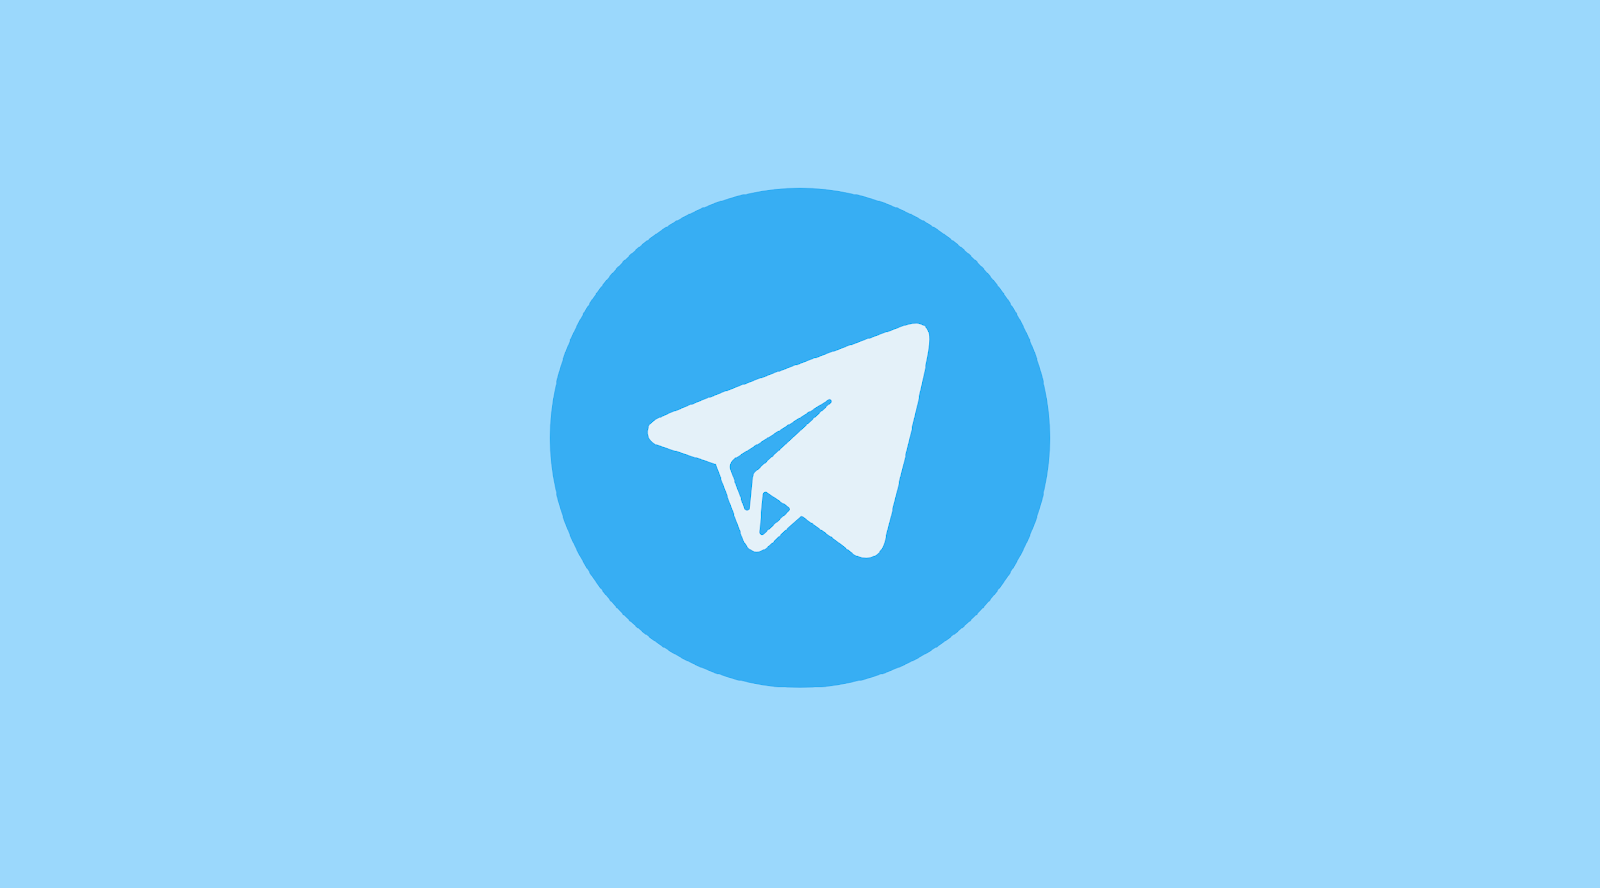 New improvements in Telegram - picture in picture, new animation